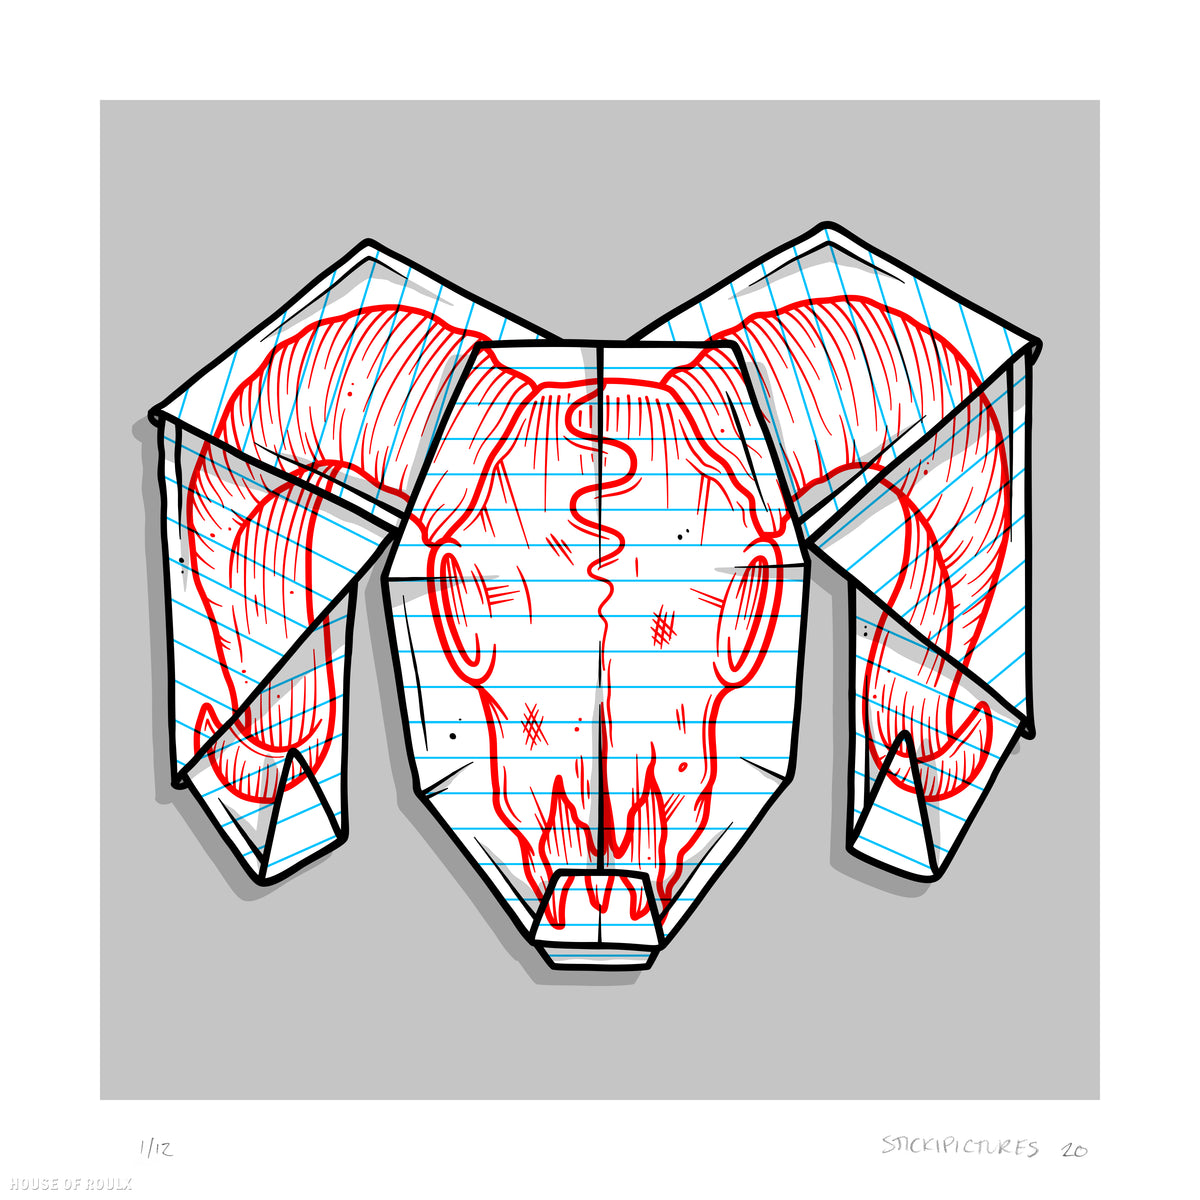 Stickipictures - &quot;Origami Ram Skull&quot; - Archival Print, Limited Edition of 12 - 12 x 12&quot;